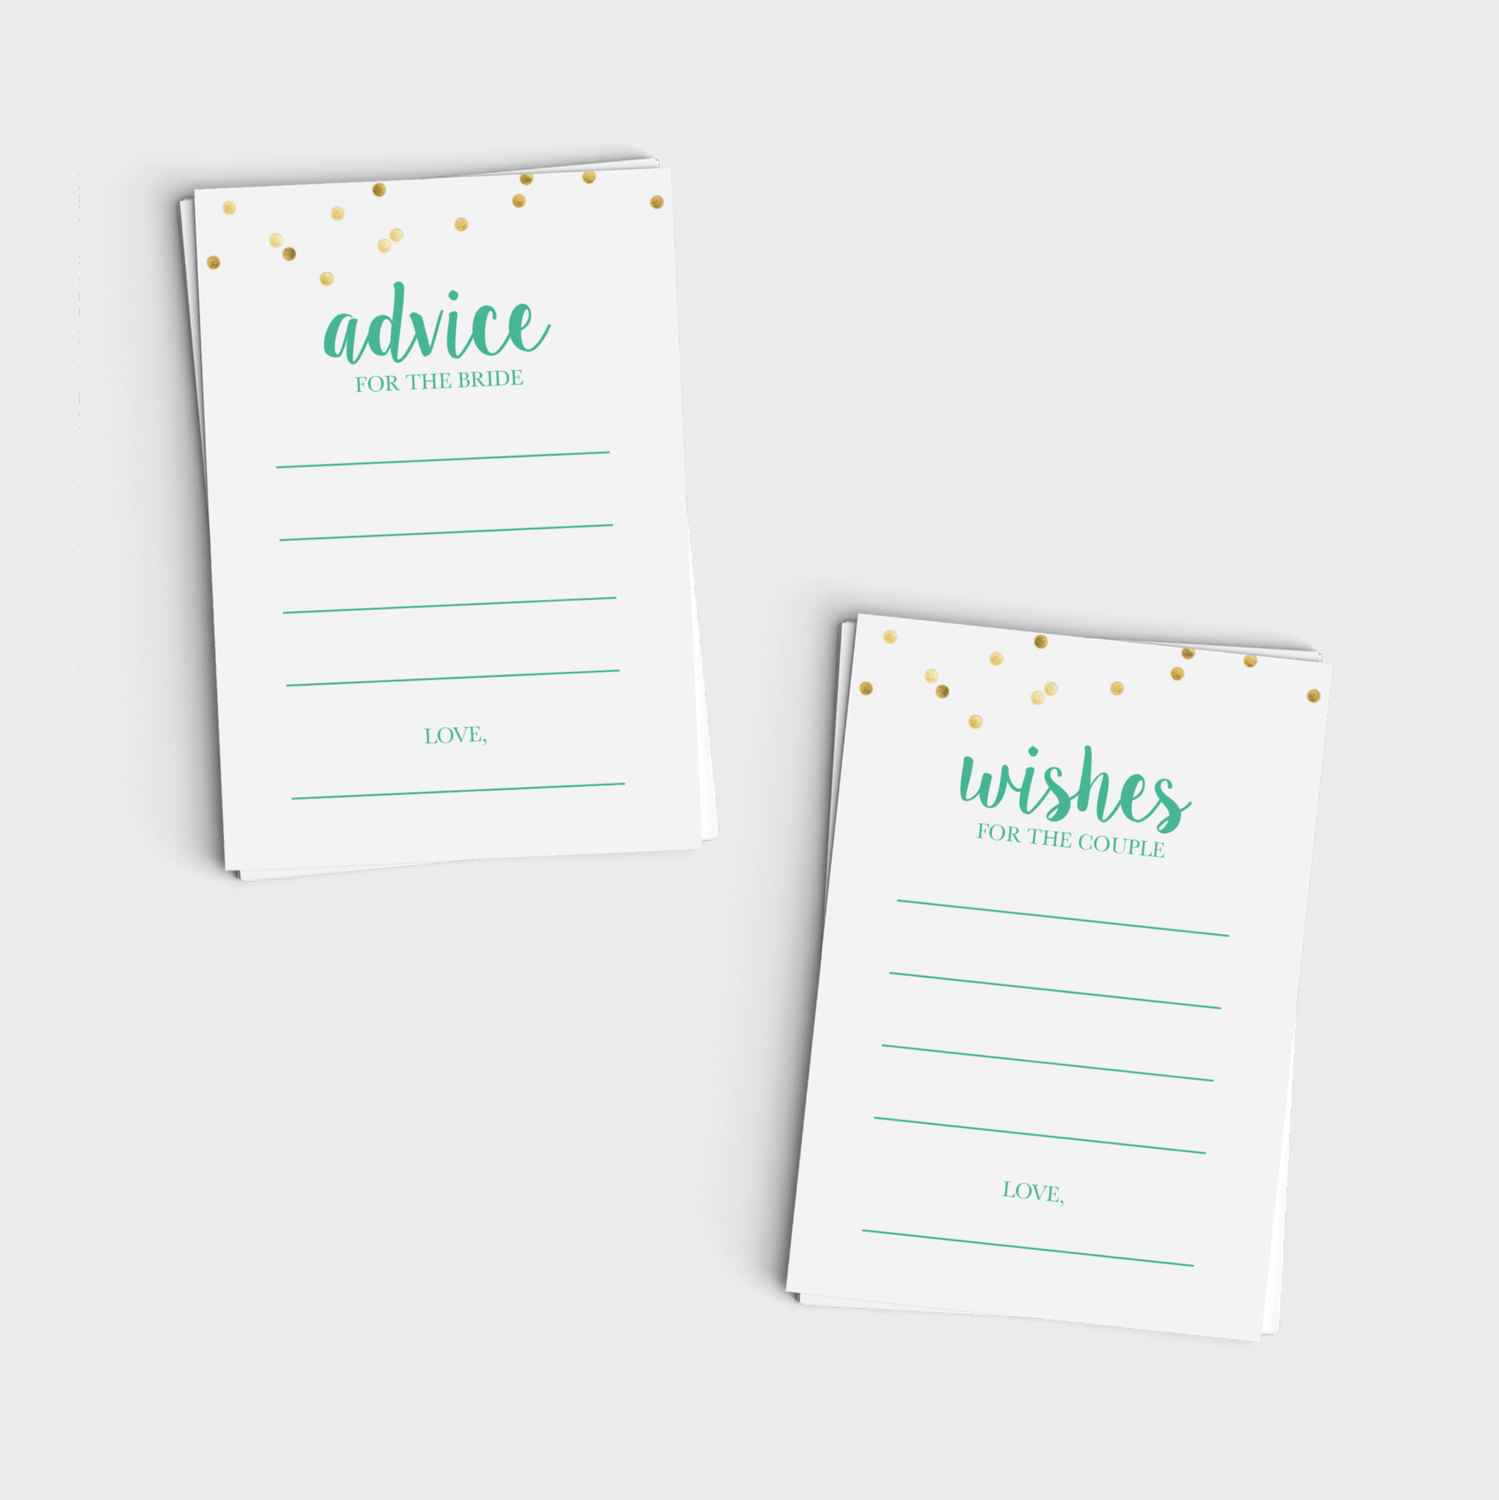 Advice for Bride, Wishes for Couple Mini Cards